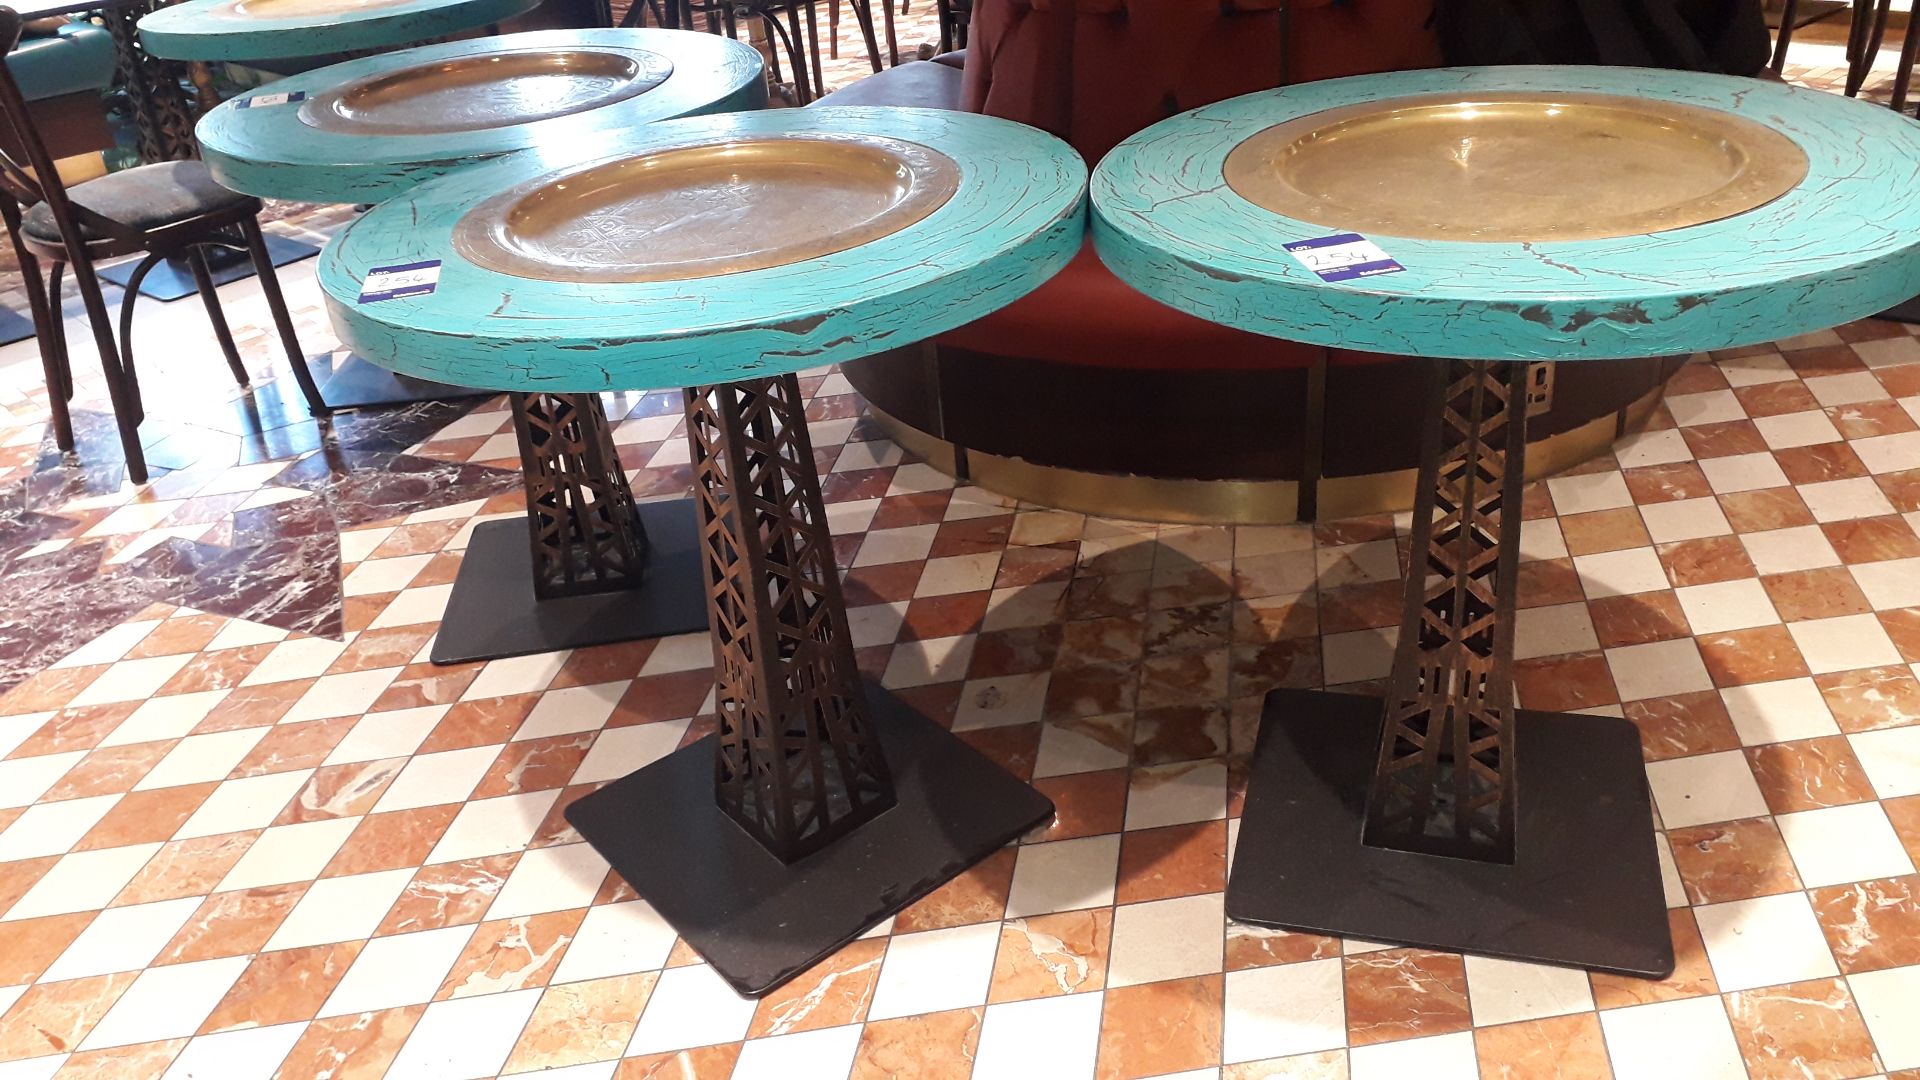 3 x Circular Painted Pedestal Tables with Brass Tray & Pierced Pedestal Base 75cm Diameter, - Image 2 of 2